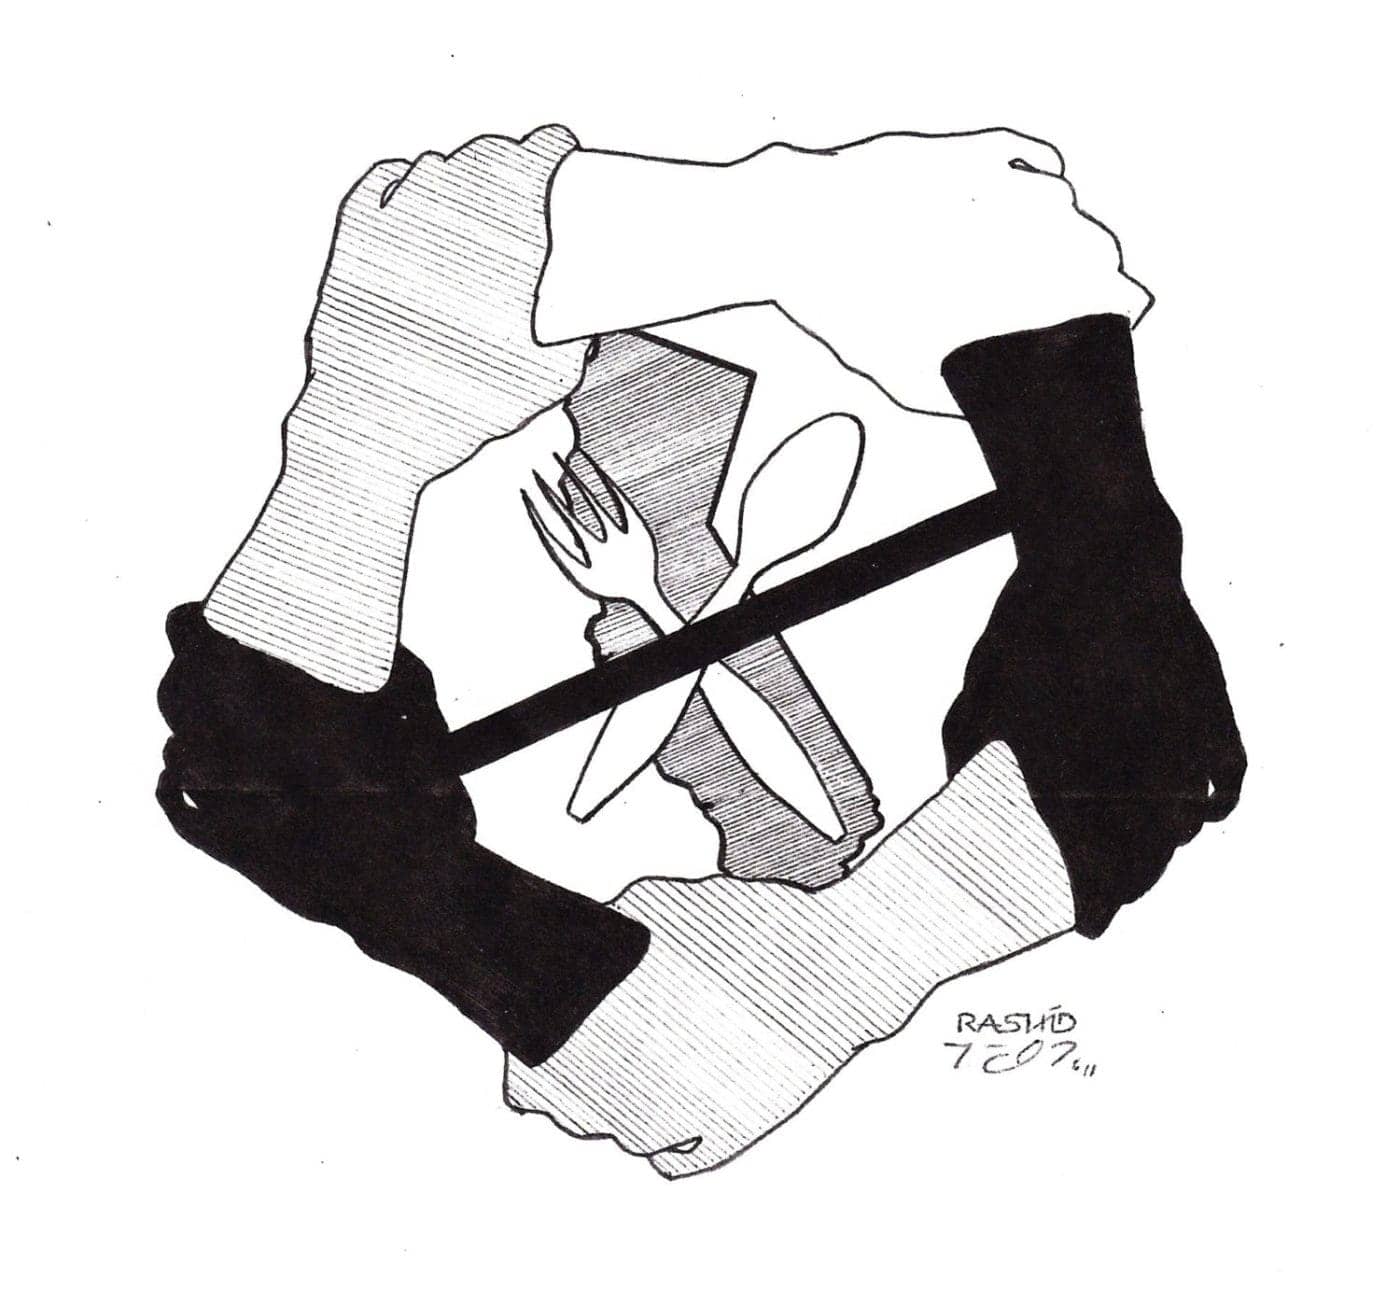 California-hunger-strike-logo-art-by-Rashid-2011-1400x1305, Virginia prisons defy new state law against solitary confinement, Abolition Now! 